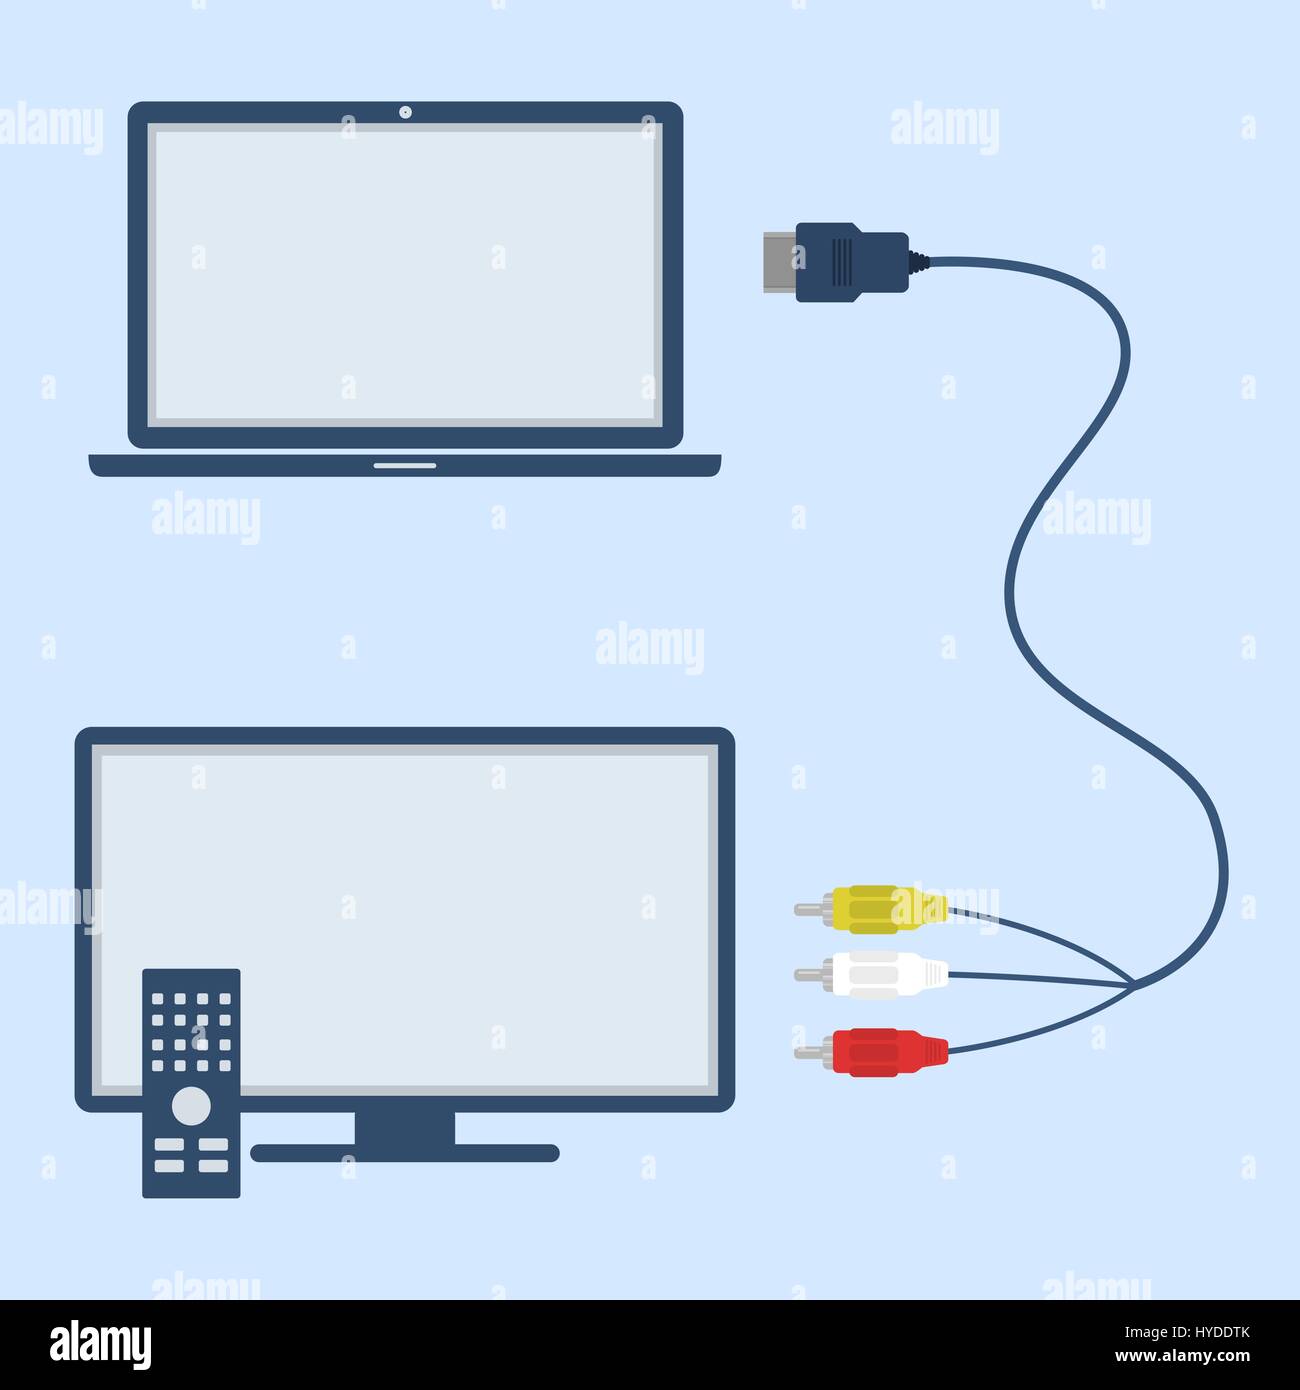 Laptop and television with RCA and HDMI interconnect. Flat design. Stock Vector